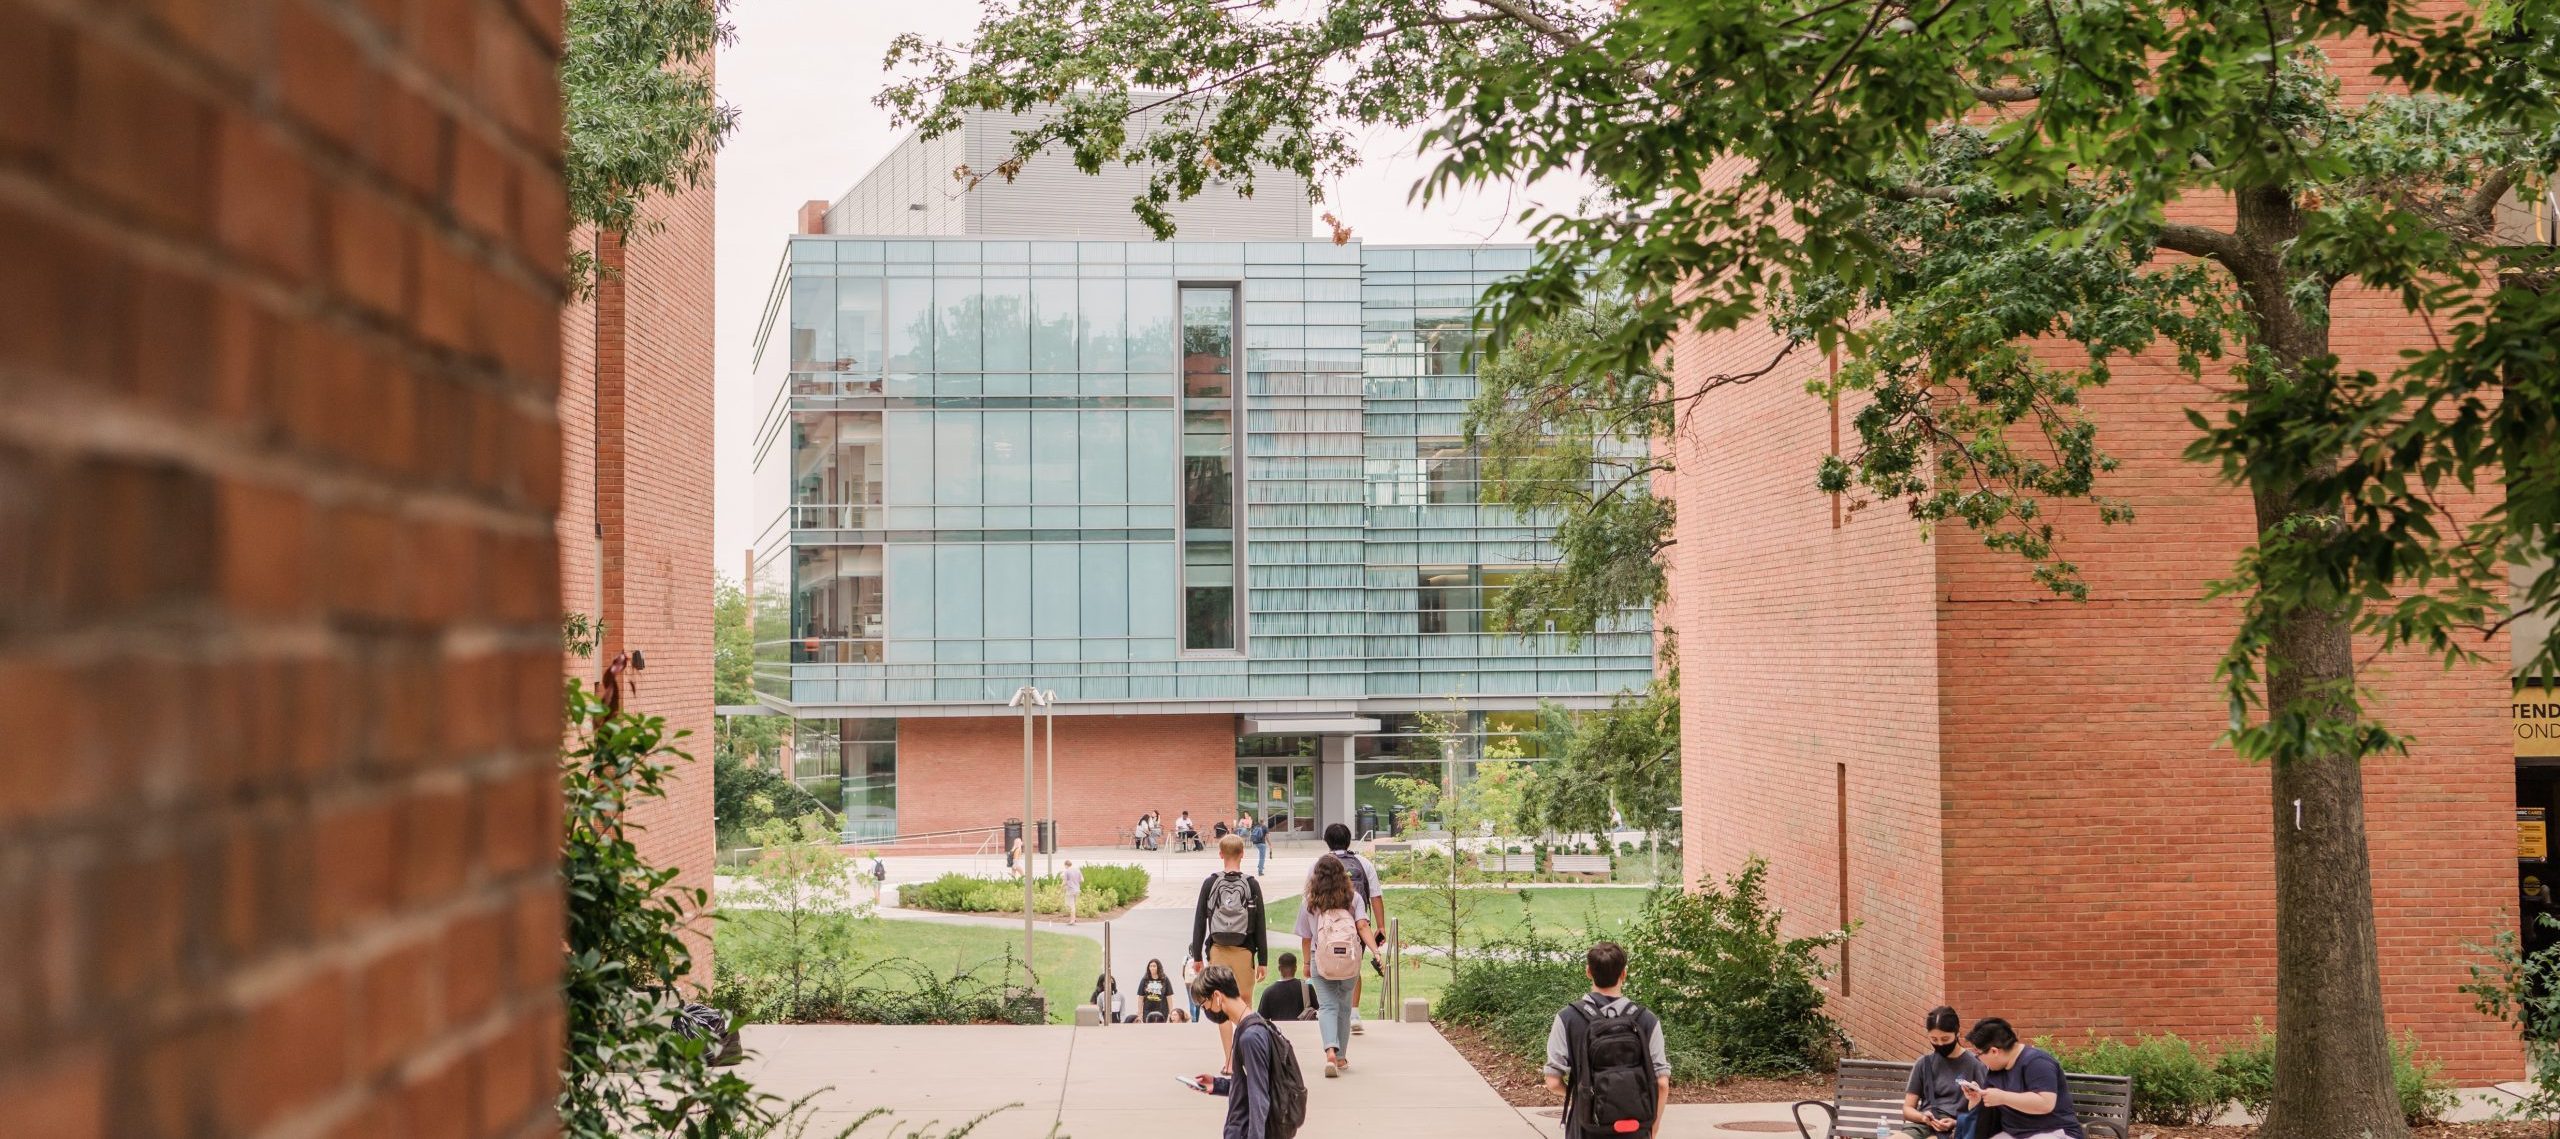 Students walking across a university, with large brick and glass building in the distance.